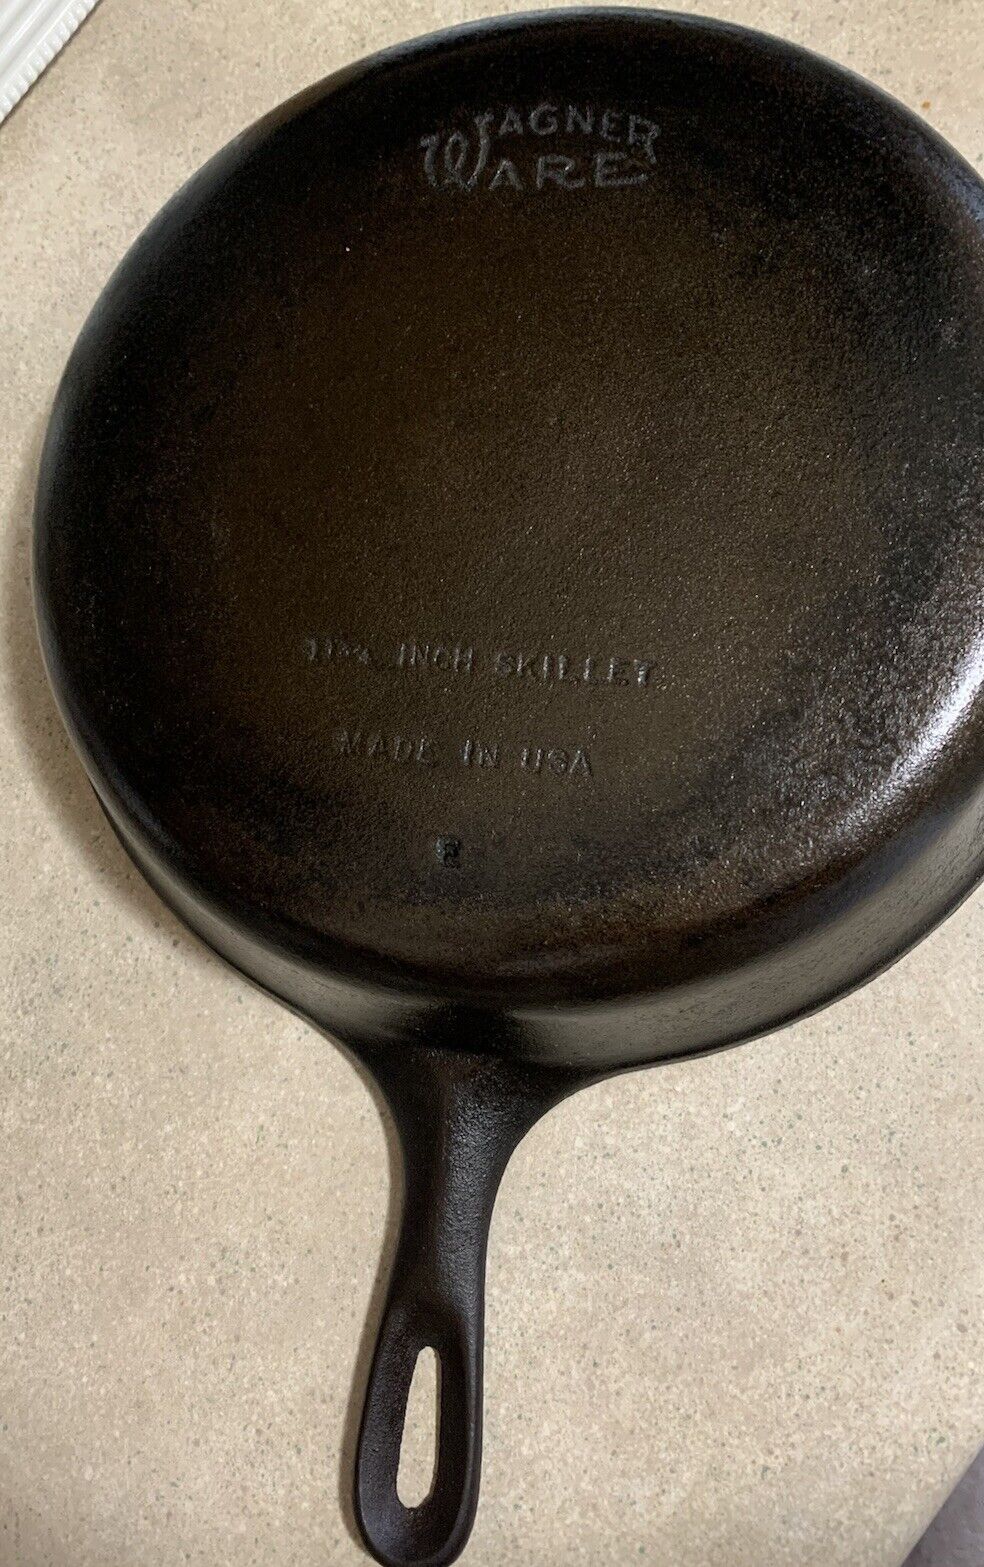 11 & 3/4 inch Wagner Ware No. 10 Cast Iron | Seasoned and Ready to Use